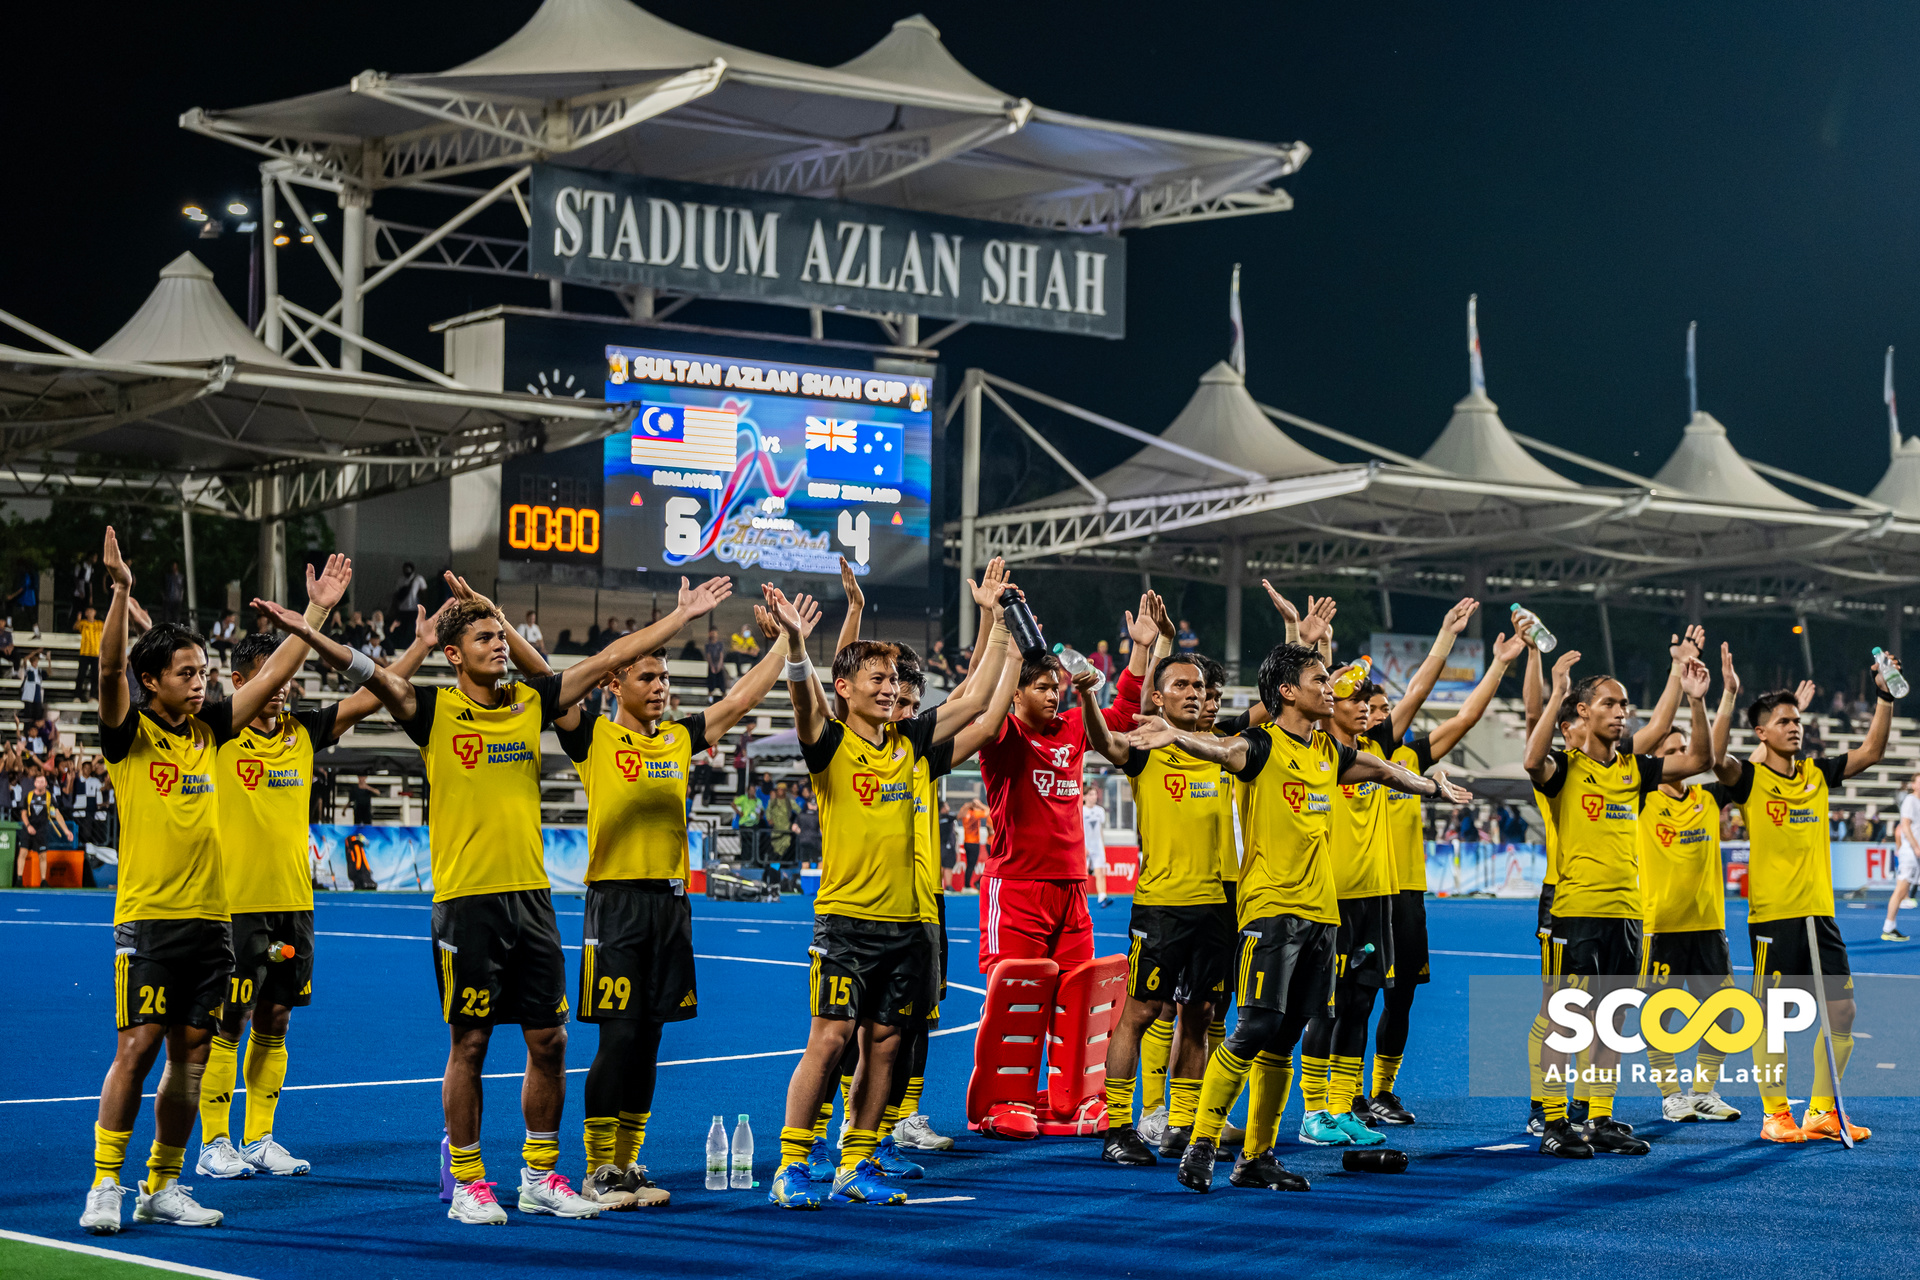 Attackers shine, defence falters: Malaysia stuns New Zealand 6-4 in Sultan Azlan Shah Cup thriller